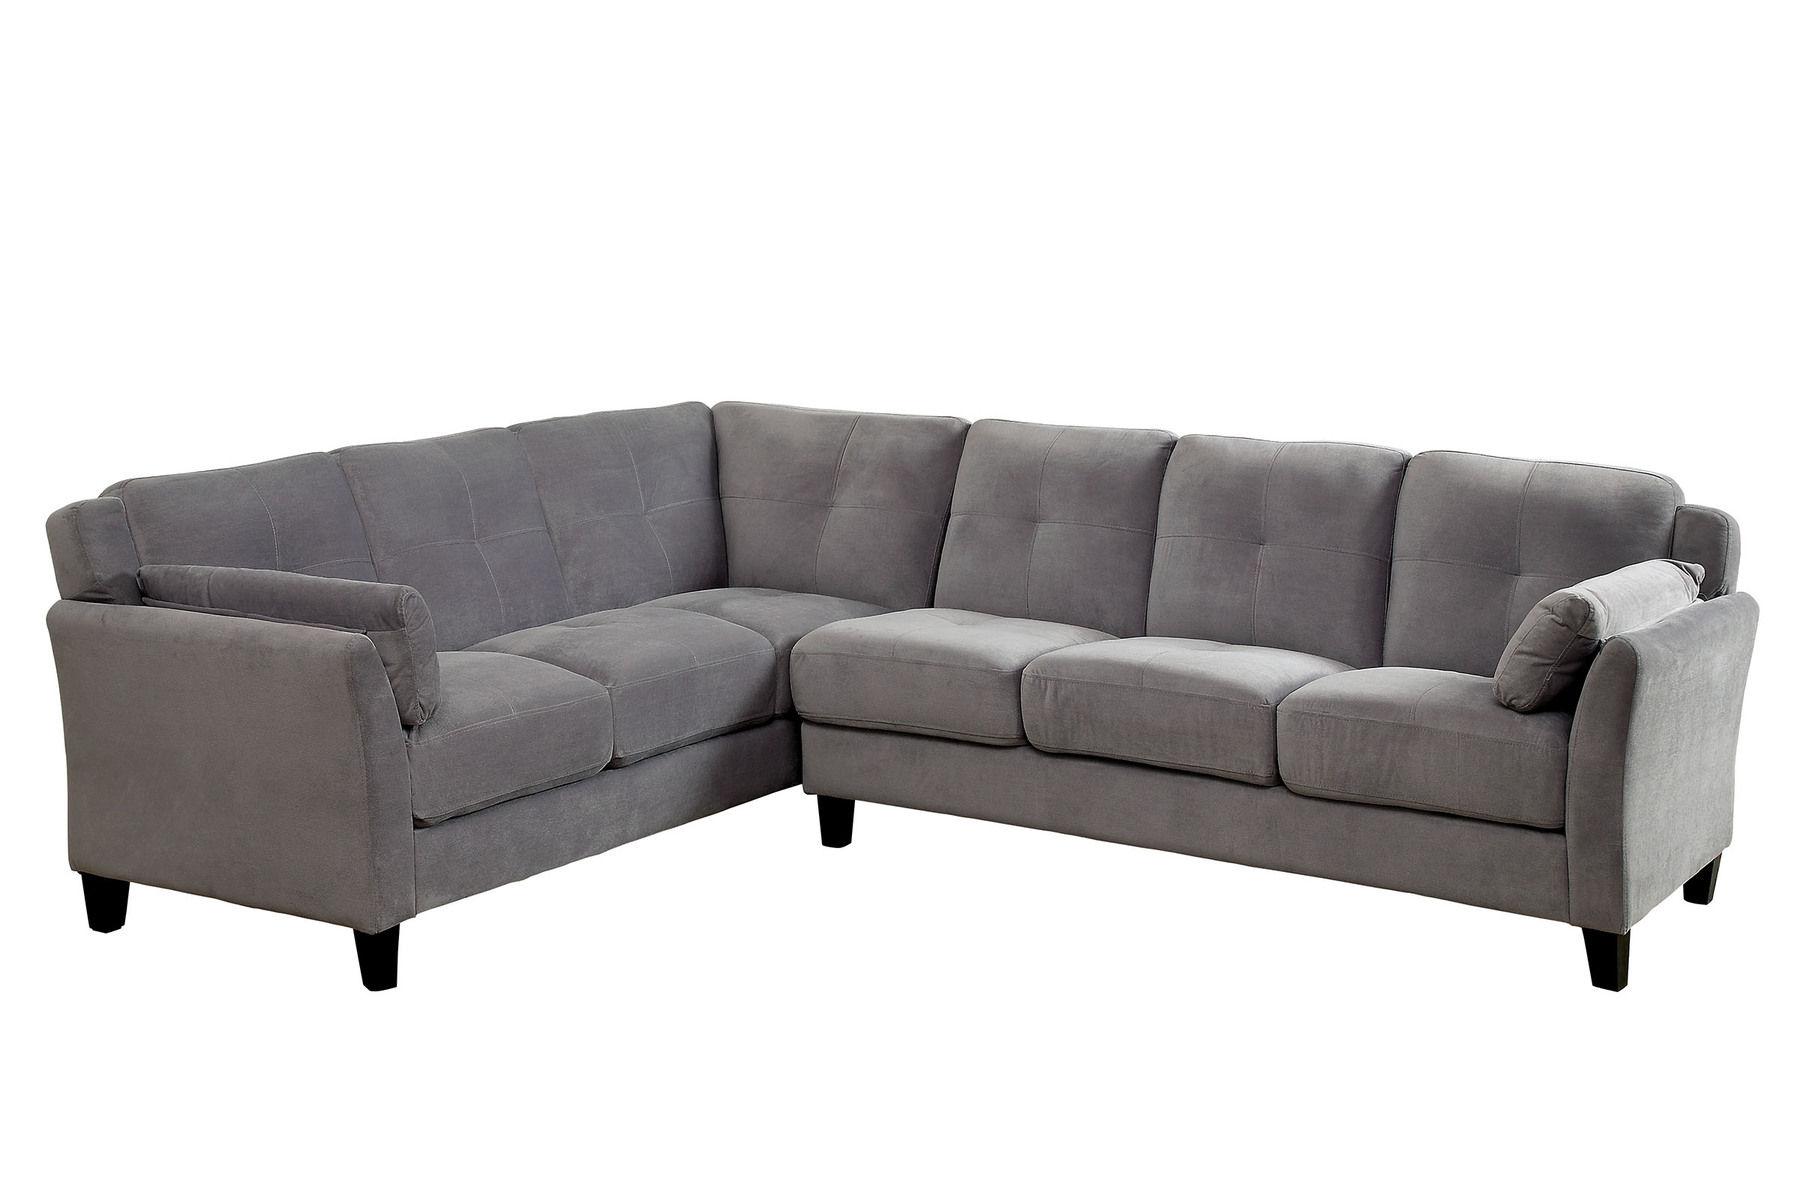 Contemporary Sectional Sofa PEEVER CM6368GY CM6368GY in Warm Gray 